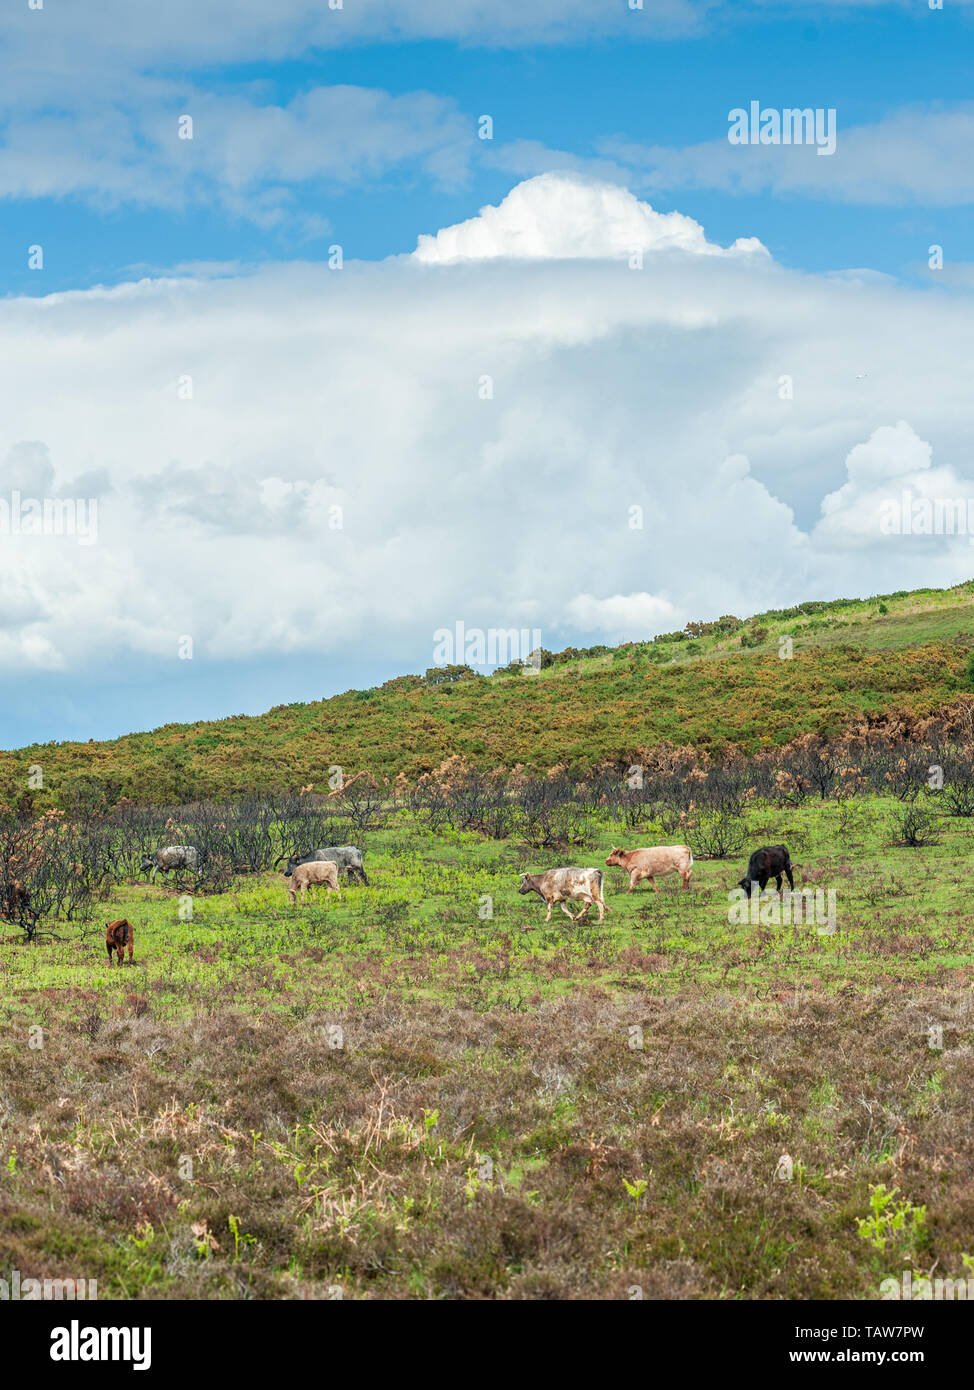 Cows grazing with a cumulonimbus cloud above, New Forest, Hampshire, England, UK, May 2019 Stock Photo